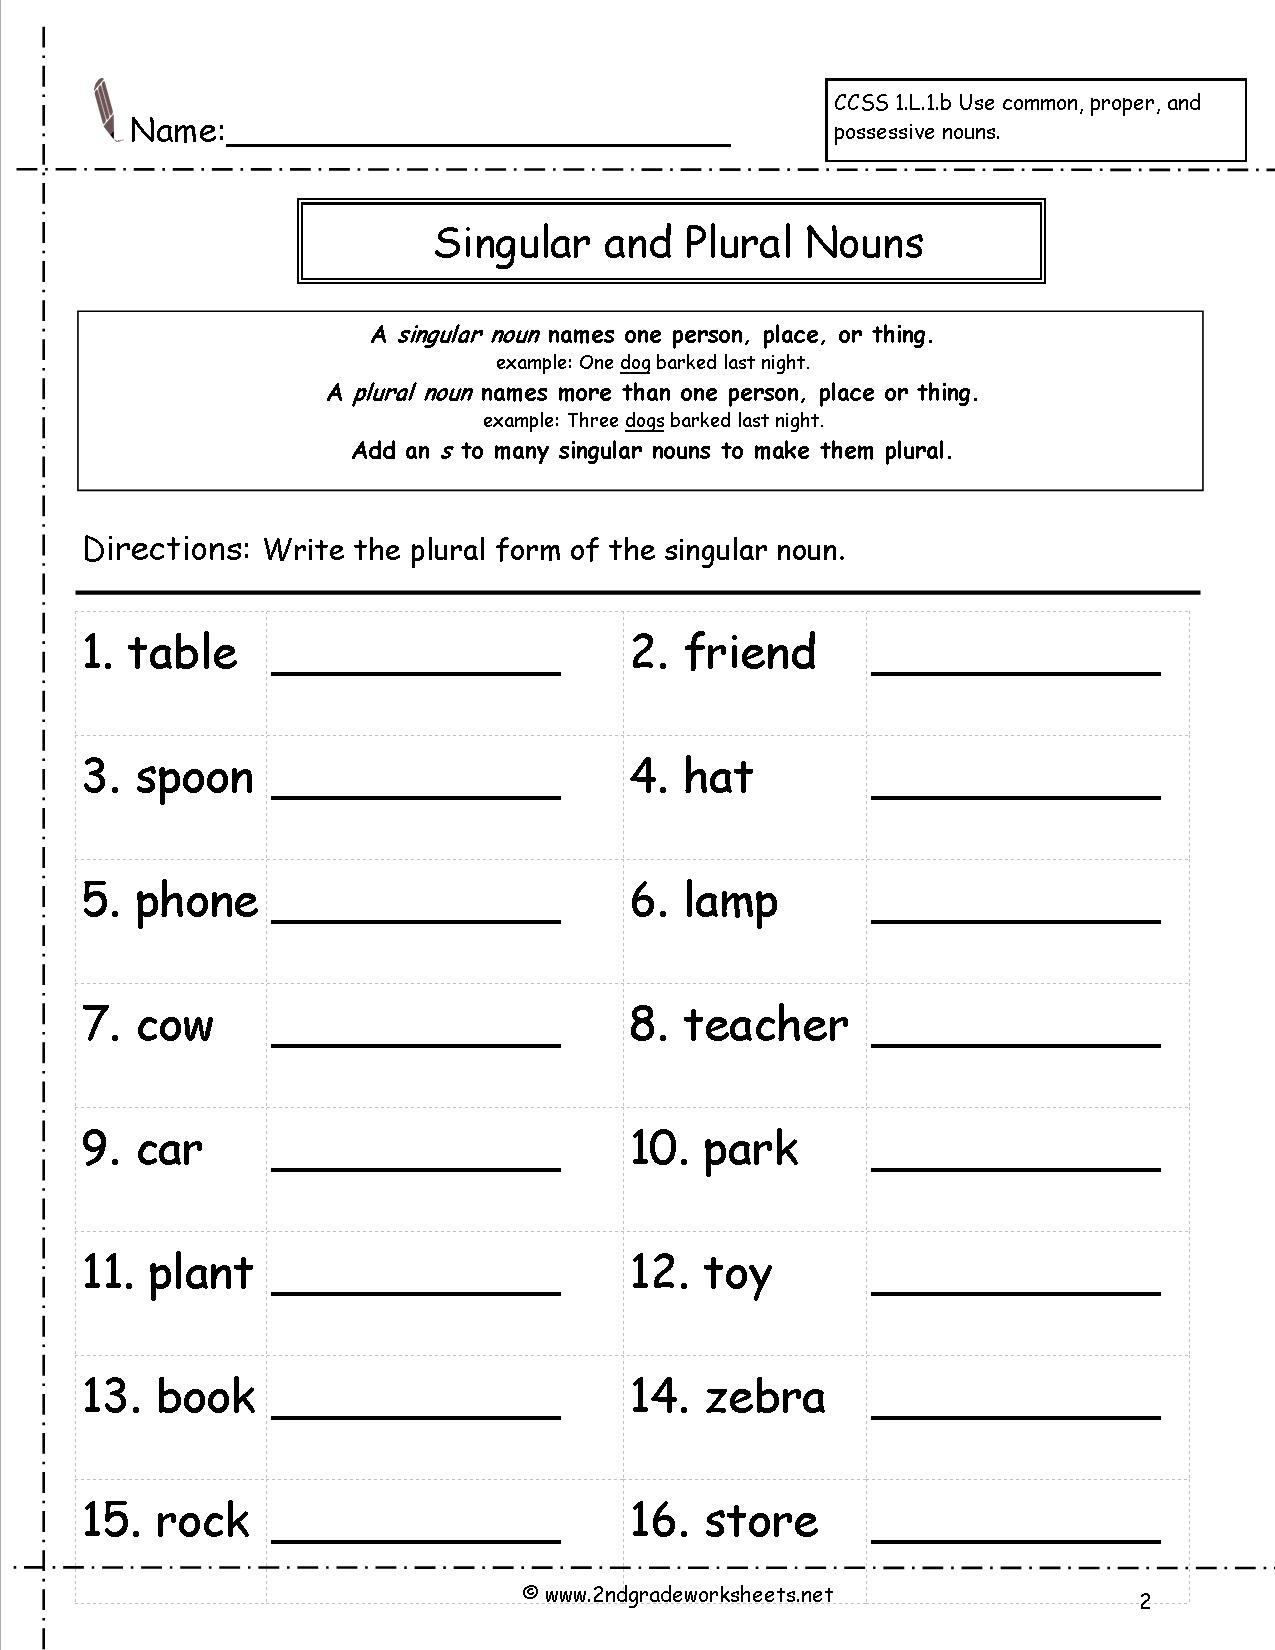 19-best-images-of-2nd-grade-english-worksheets-nouns-verbs-printable